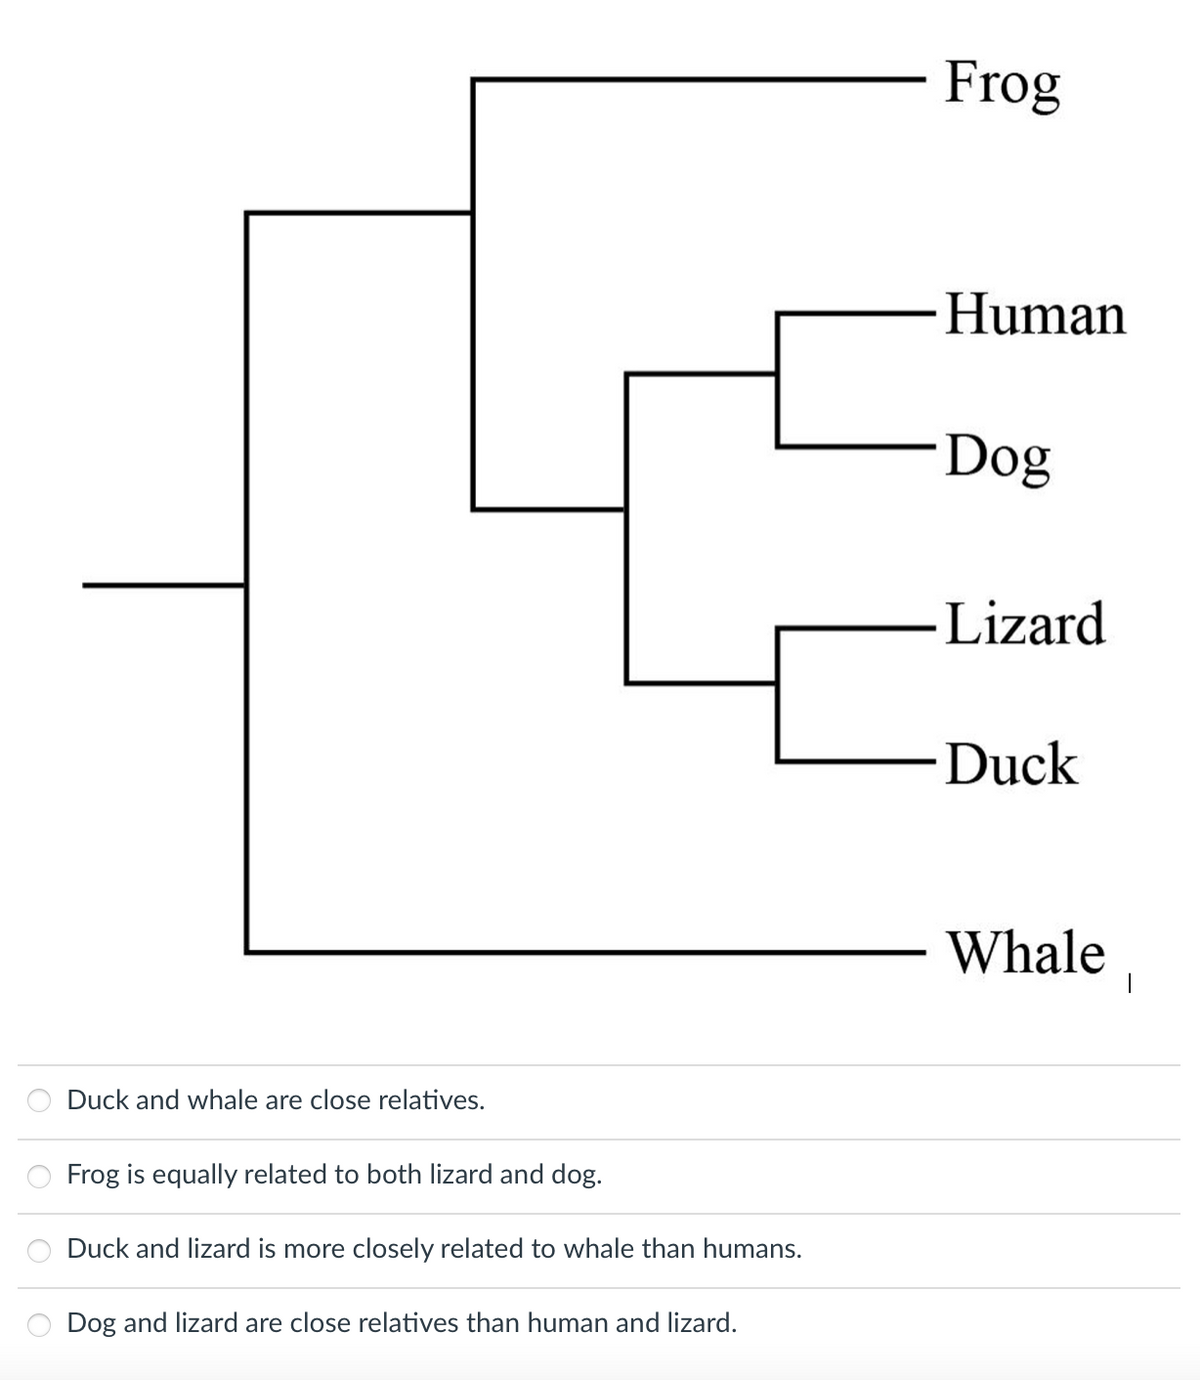 Frog
Human
Dog
Lizard
Duck
Whale
Duck and whale are close relatives.
Frog is equally related to both lizard and dog.
Duck and lizard is more closely related to whale than humans.
Dog and lizard are close relatives than human and lizard.
